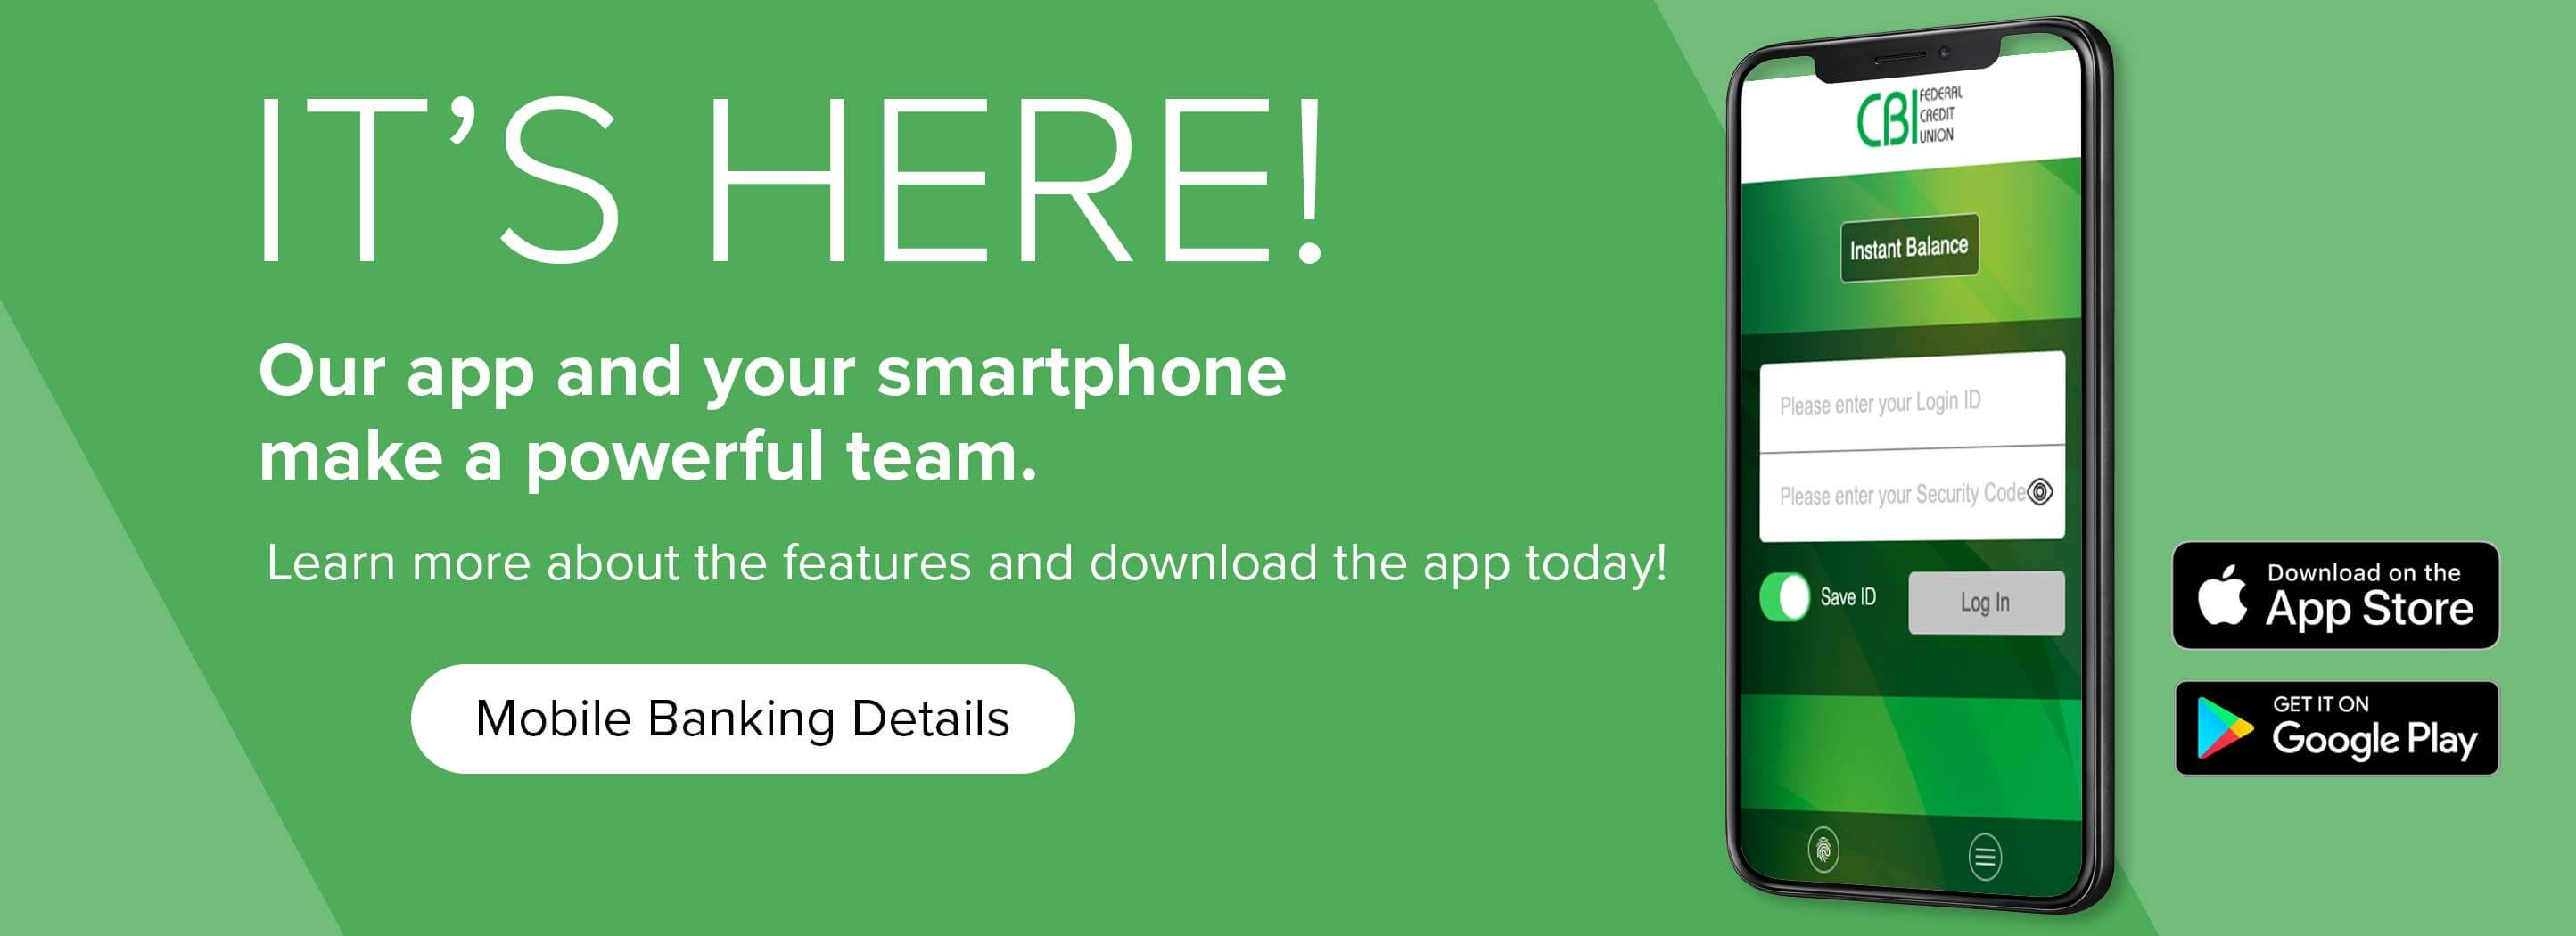 It's here! Our app and your smartphone make a powerful team. Learn more about the features and download the app today! Mobile Banking Details